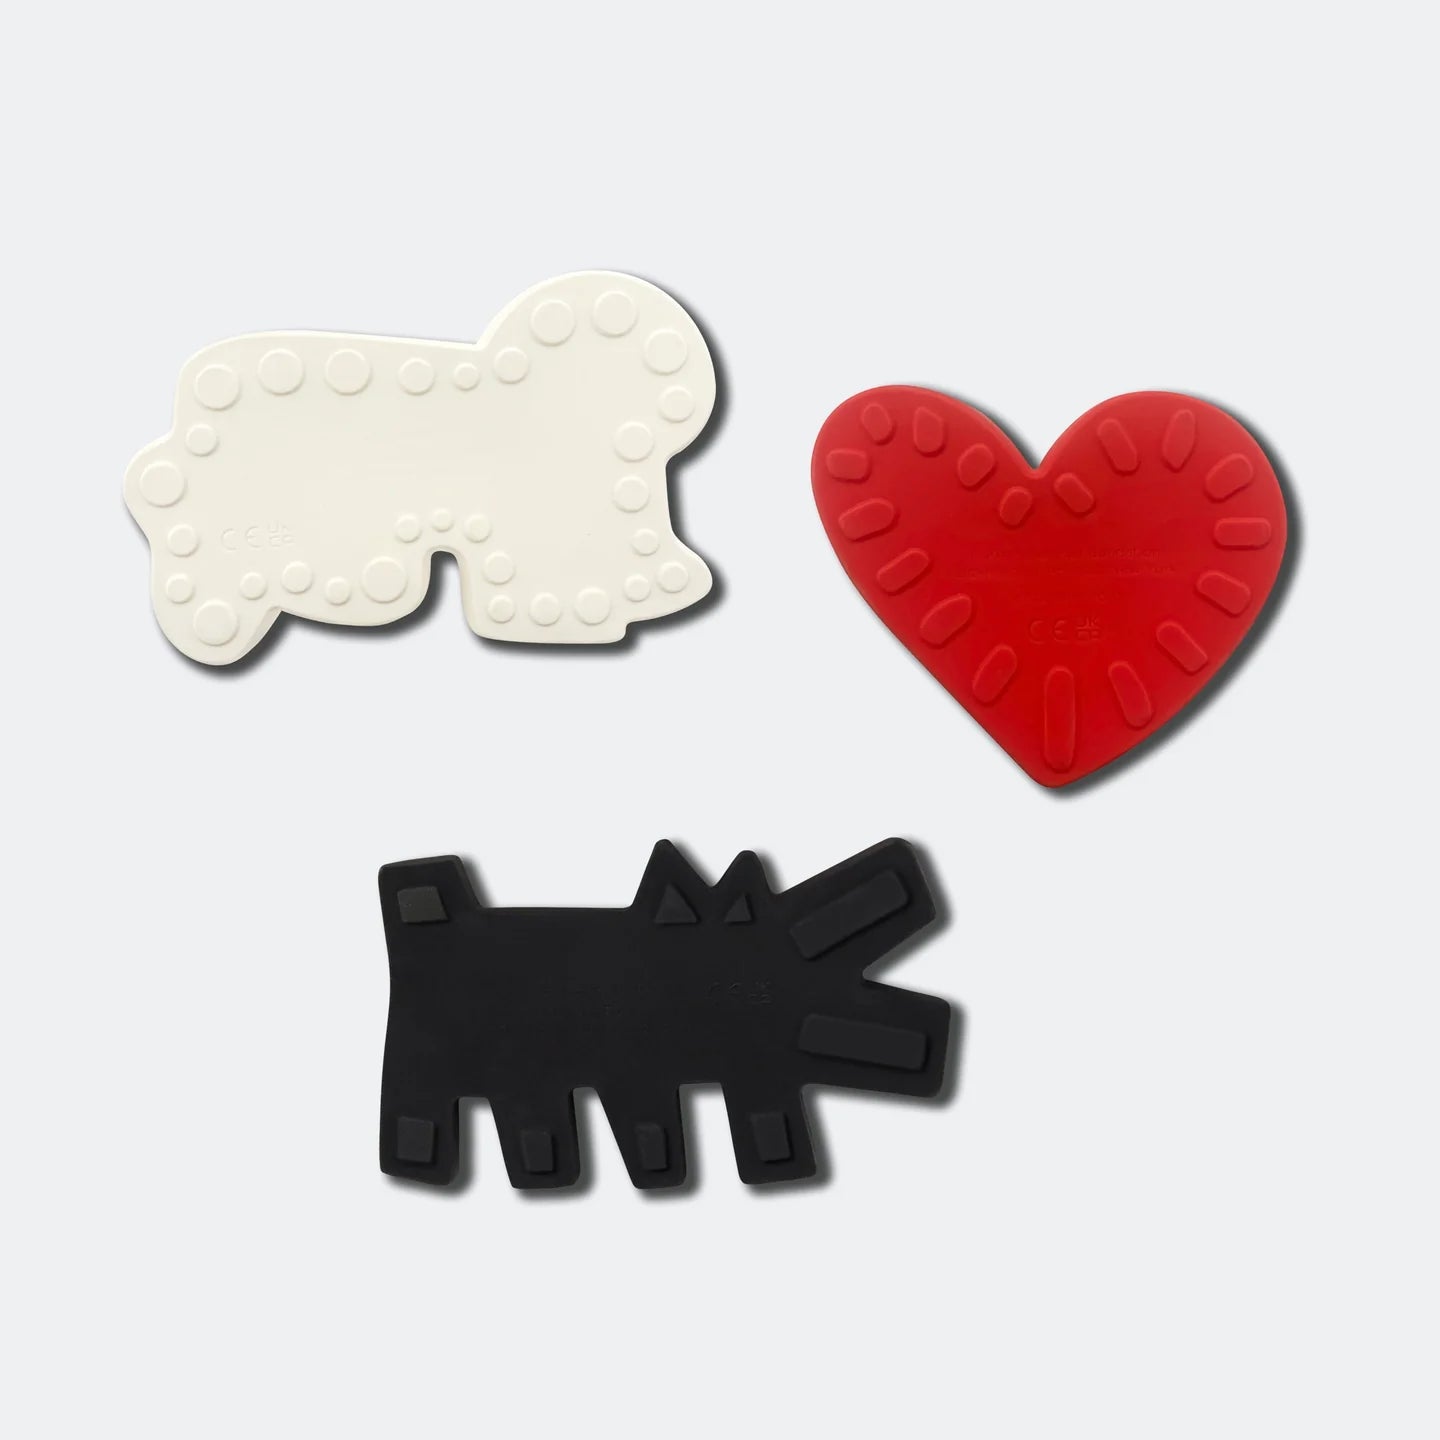 KEITH HARING BATH TOYS - Suitable from birth